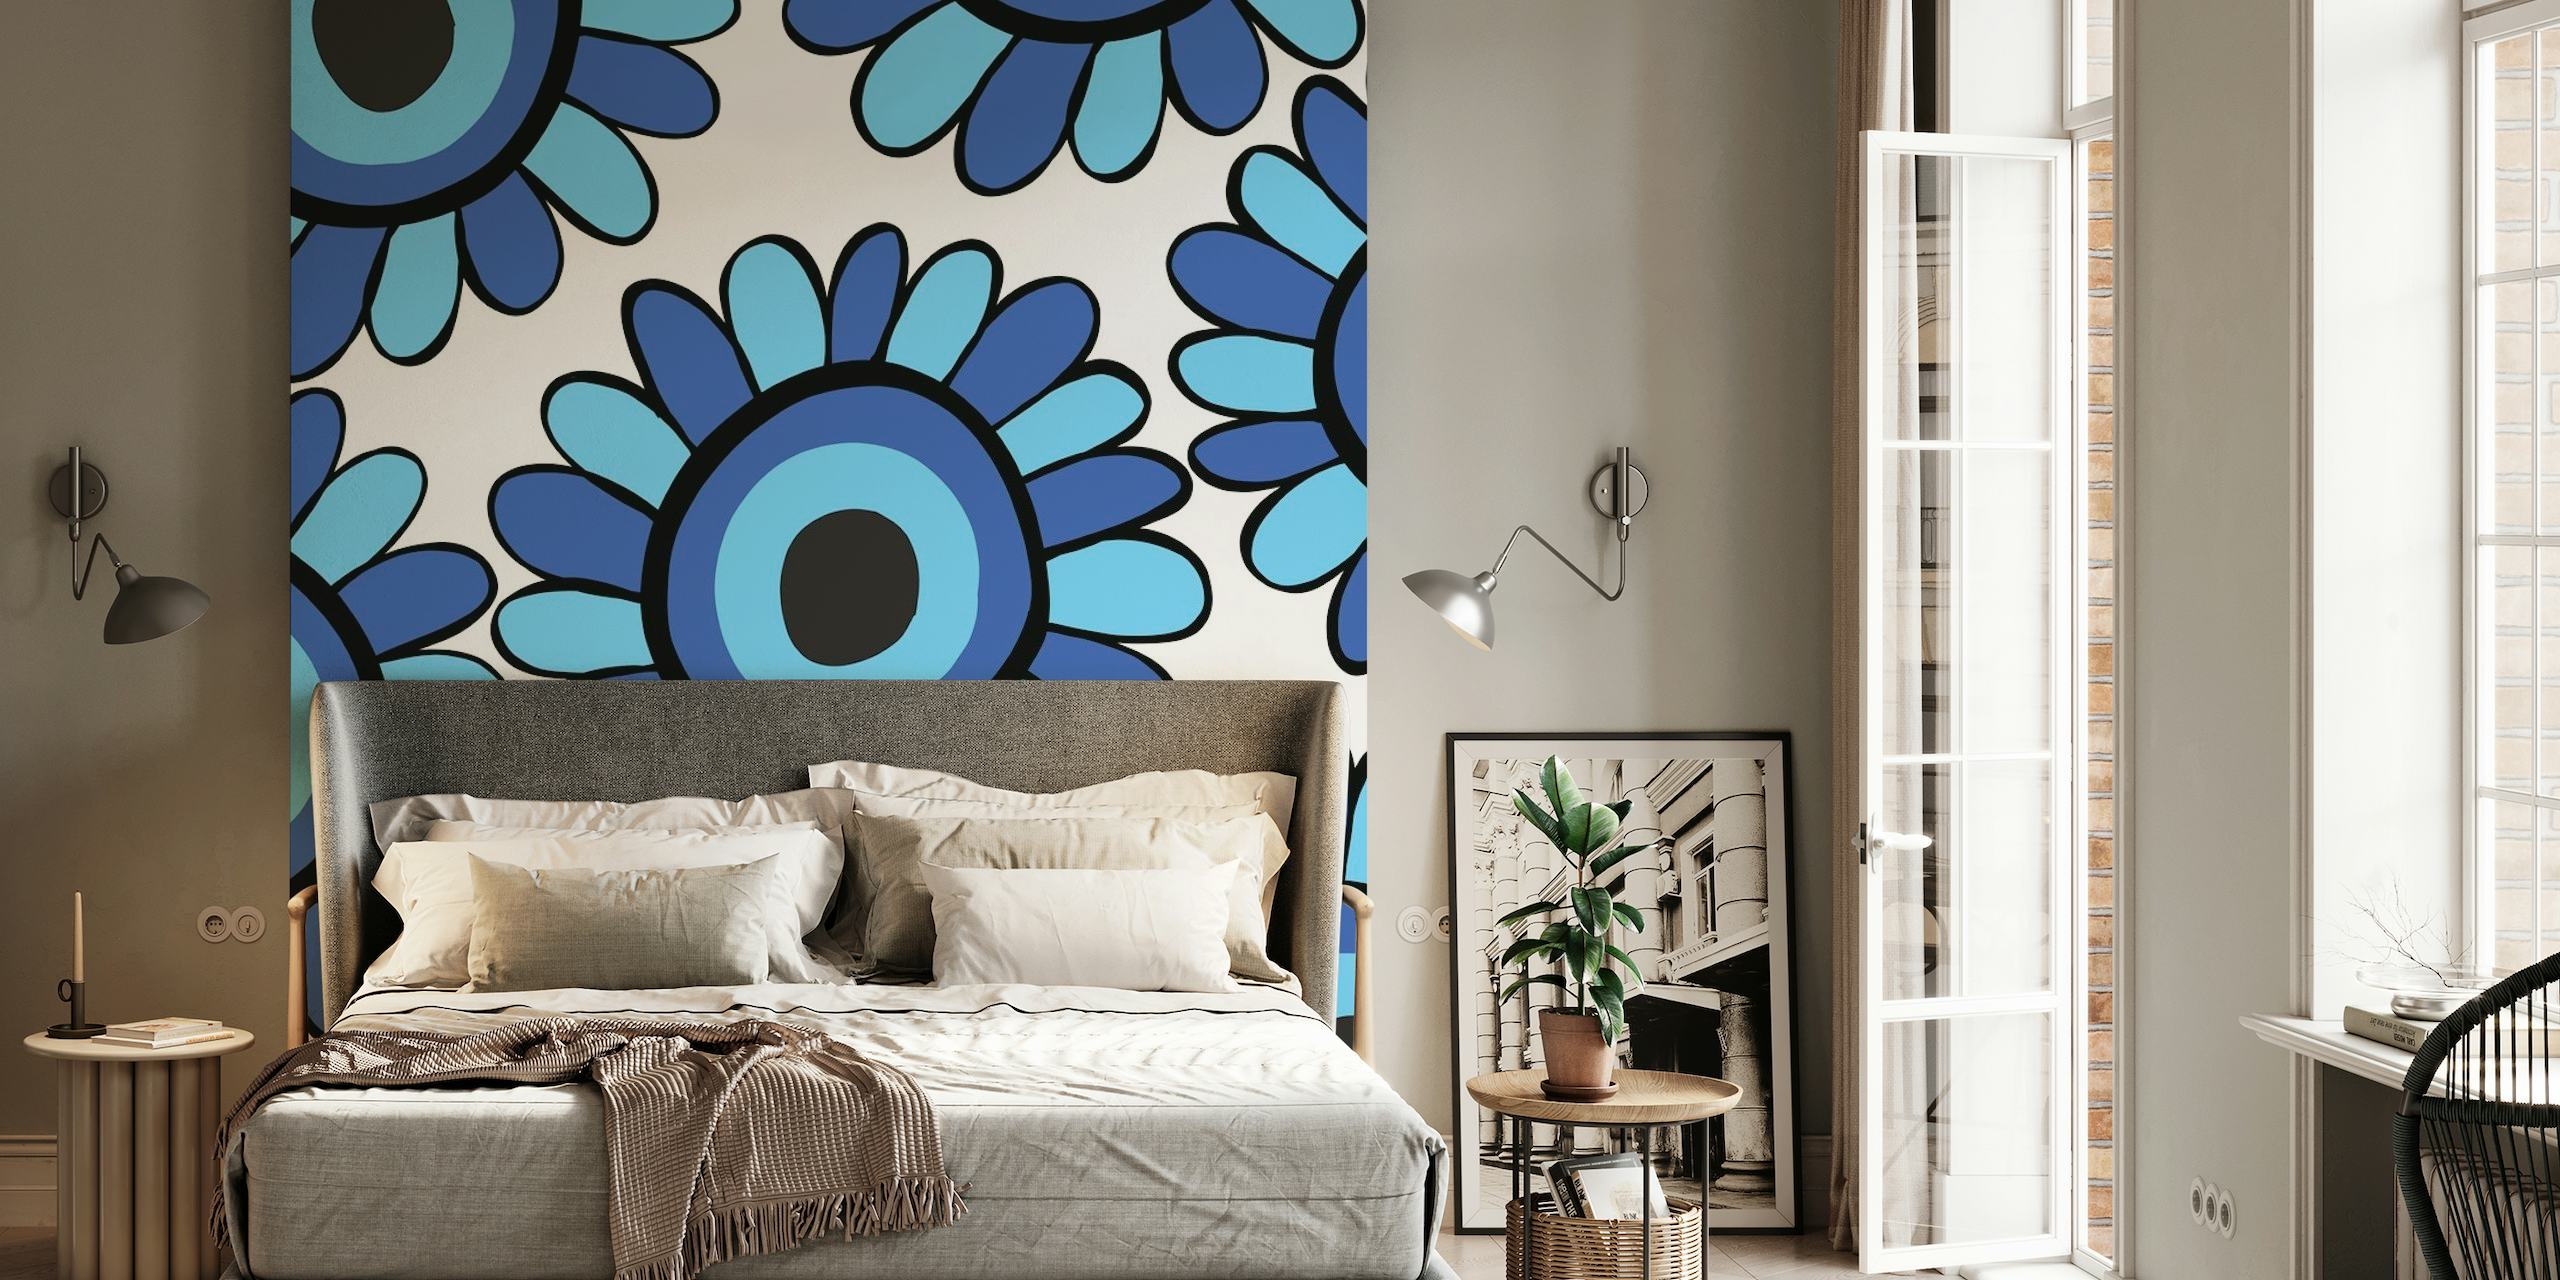 Evil Eye Sunflower Pattern wall mural with blue and white colors